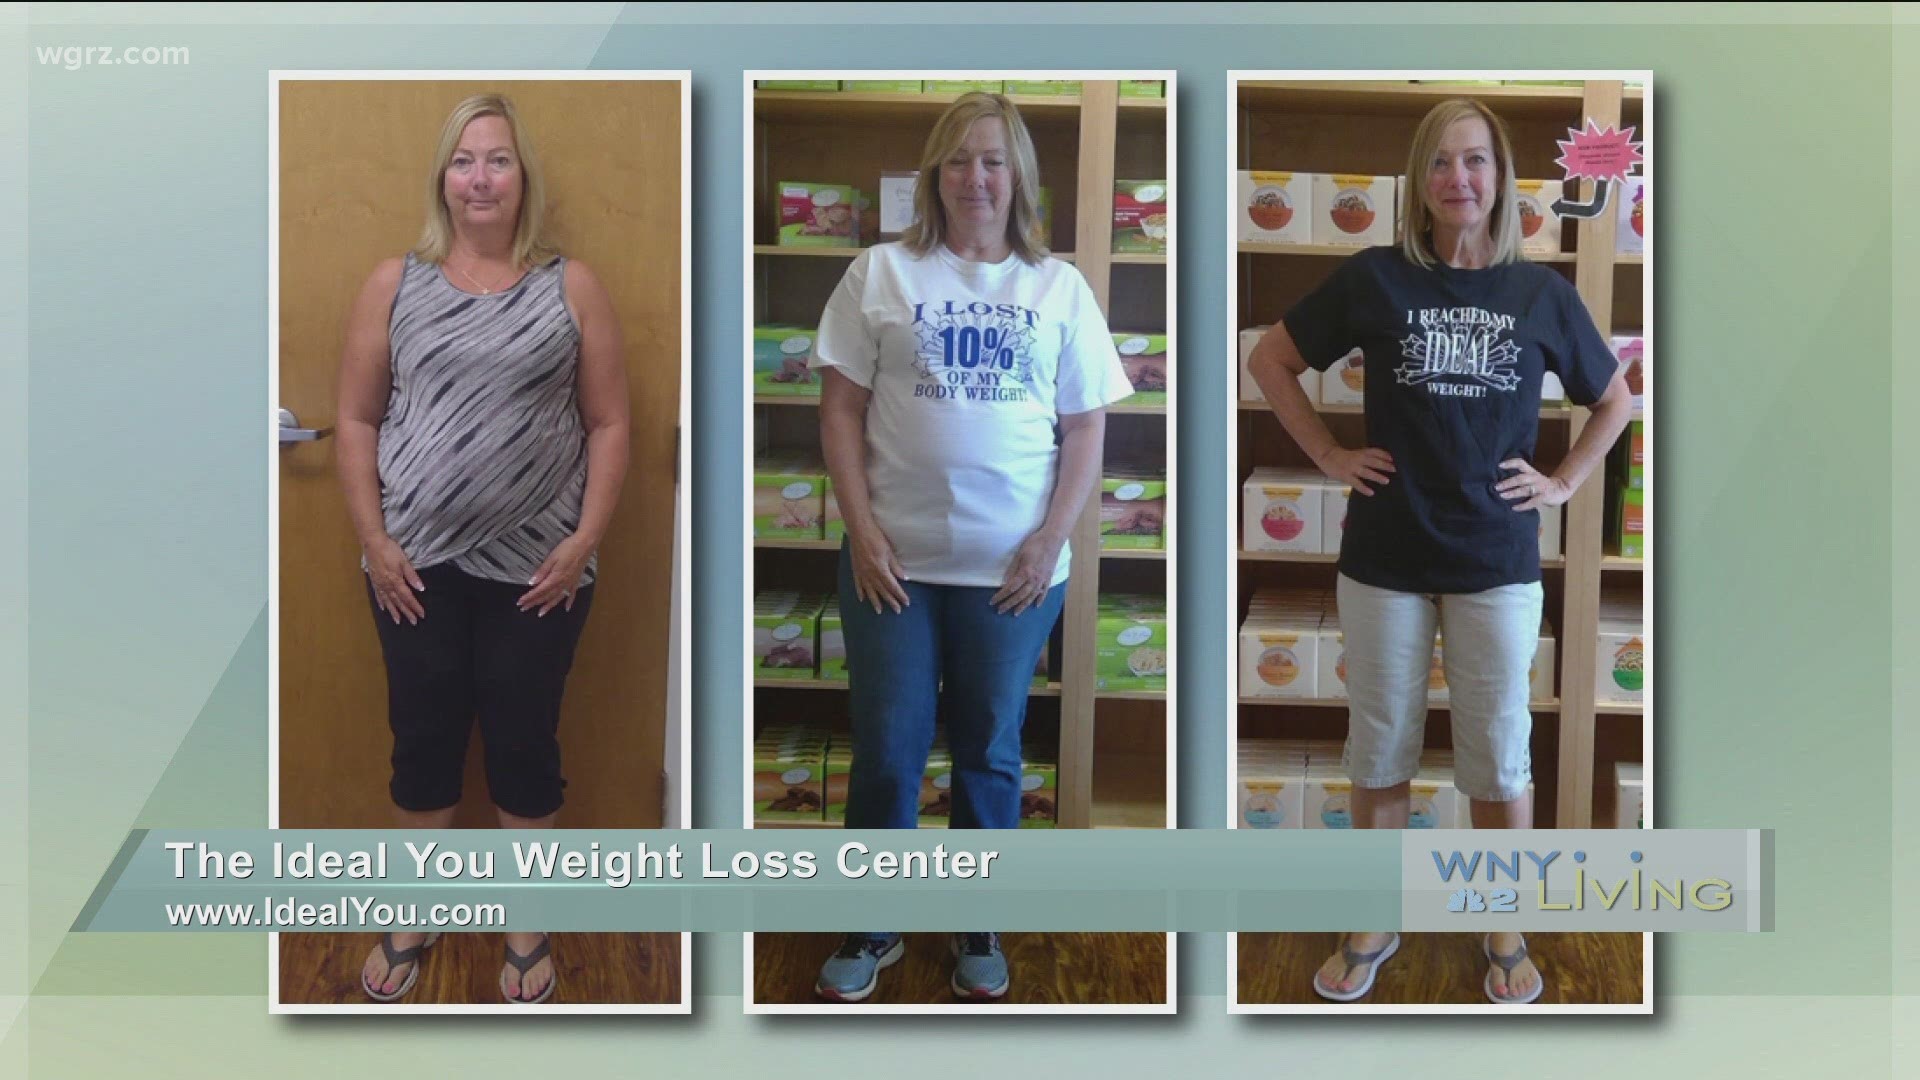 WNY Living - October 24 - The Ideal You Weight Loss Center (THIS VIDEO IS SPONSORED BY THE IDEAL YOU WEIGHT LOSS CENTER)